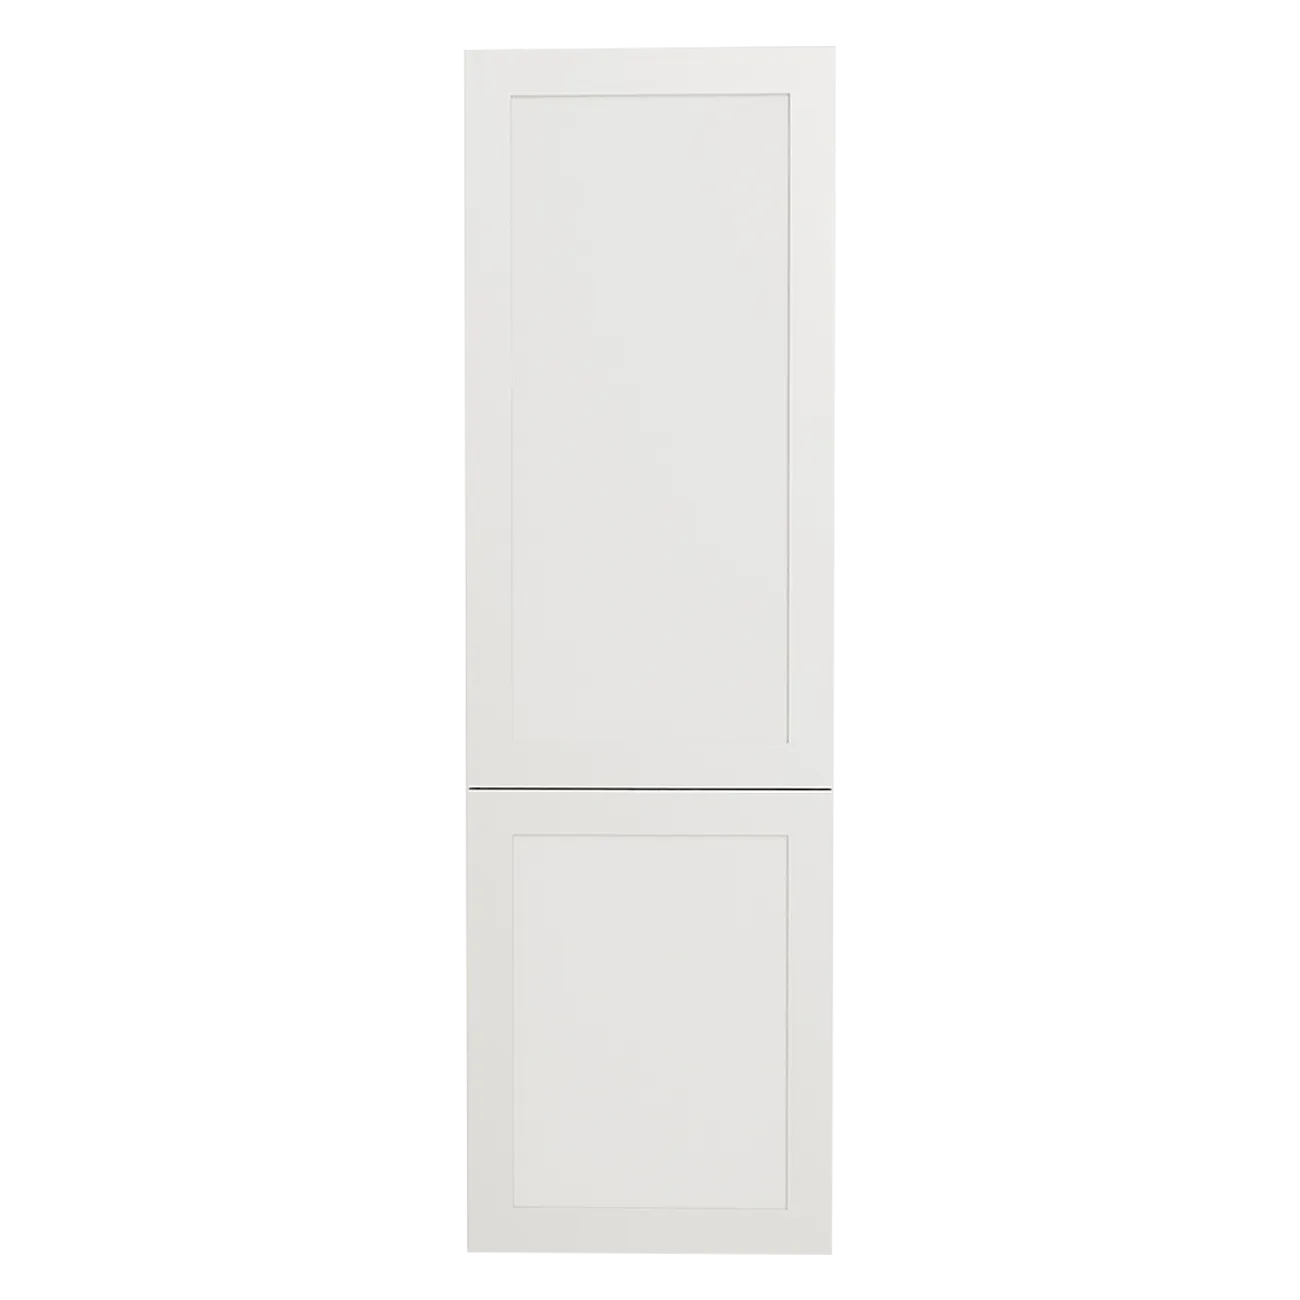 Urbania Collection Assembled Kitchen Cabinet Pantry Cabinet 15 in x 49.5 in x 24 in - Shaker White